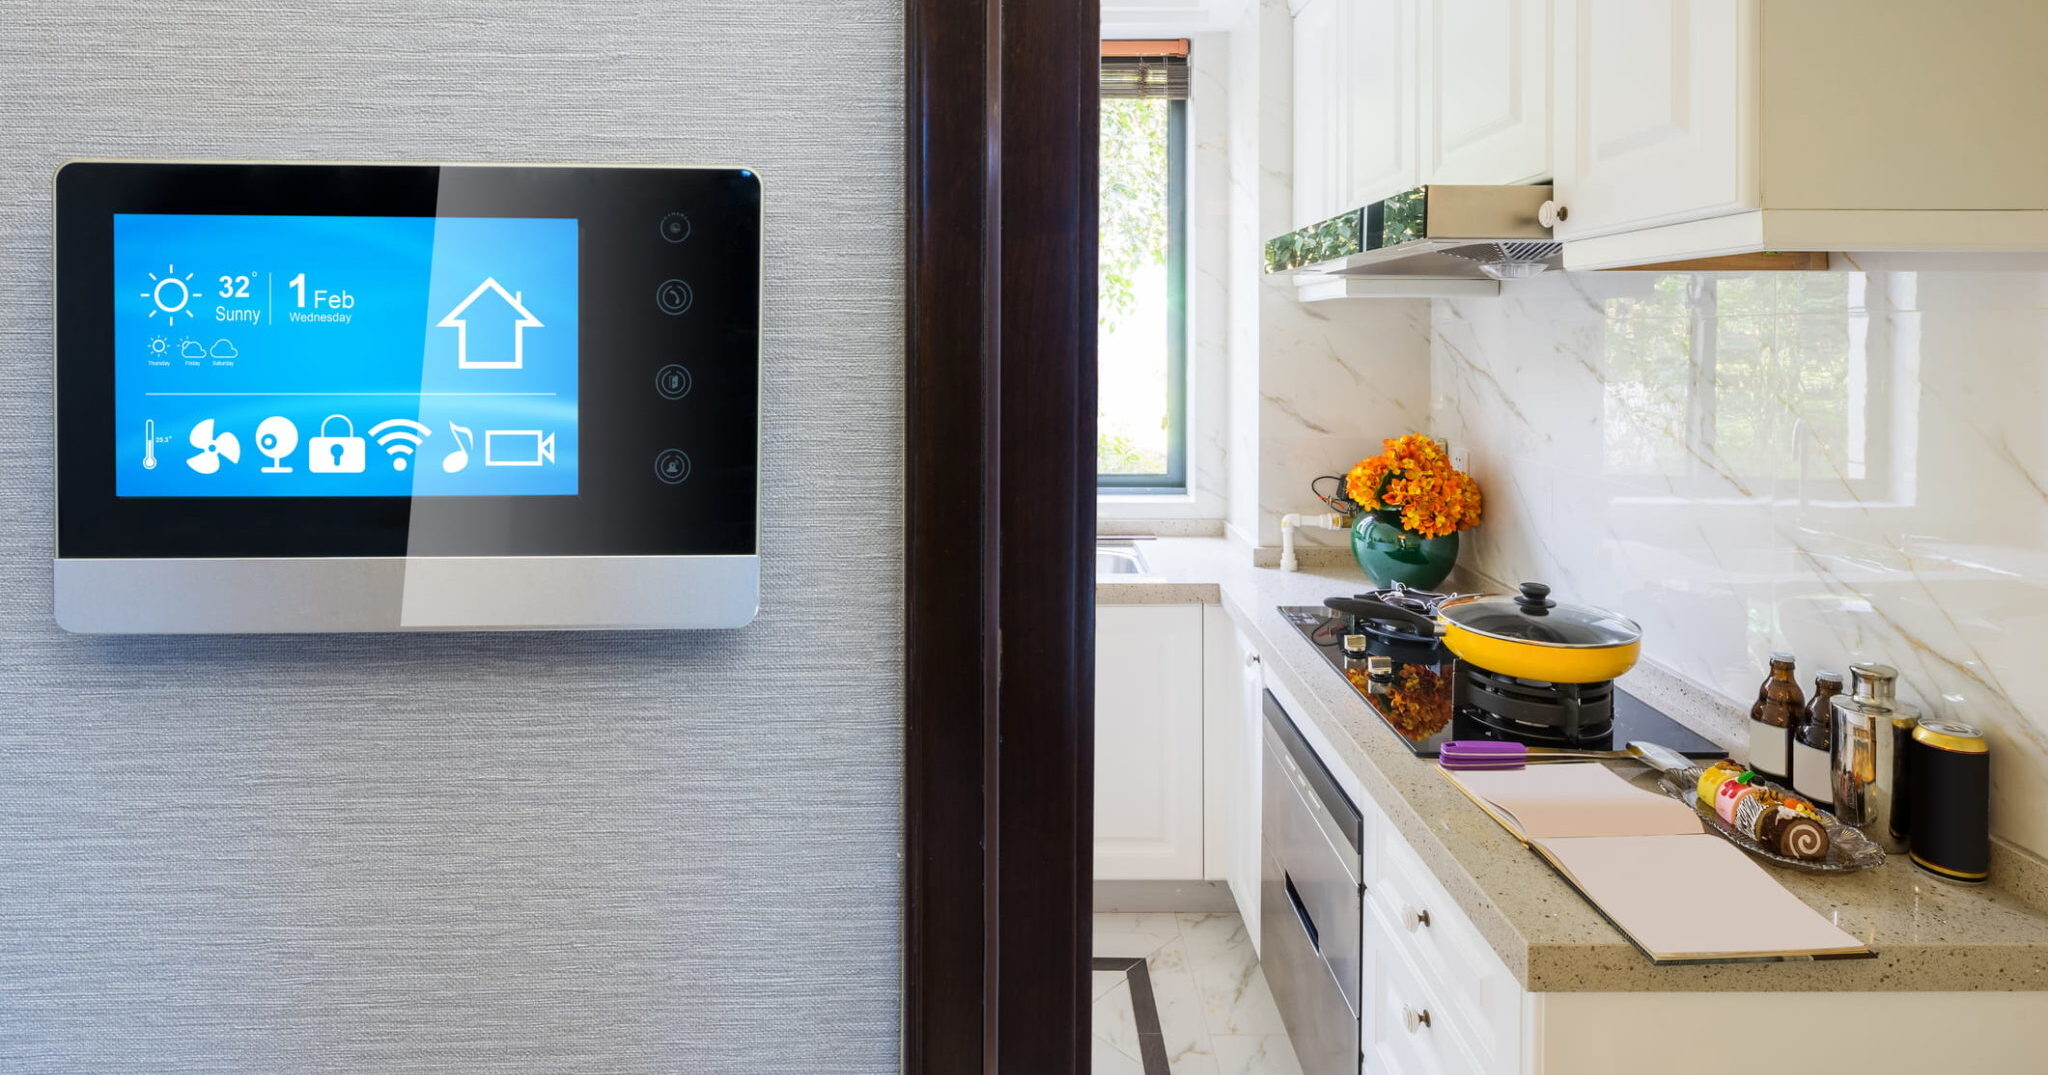 DIY Home Automation Guide for Beginners | SafeWise